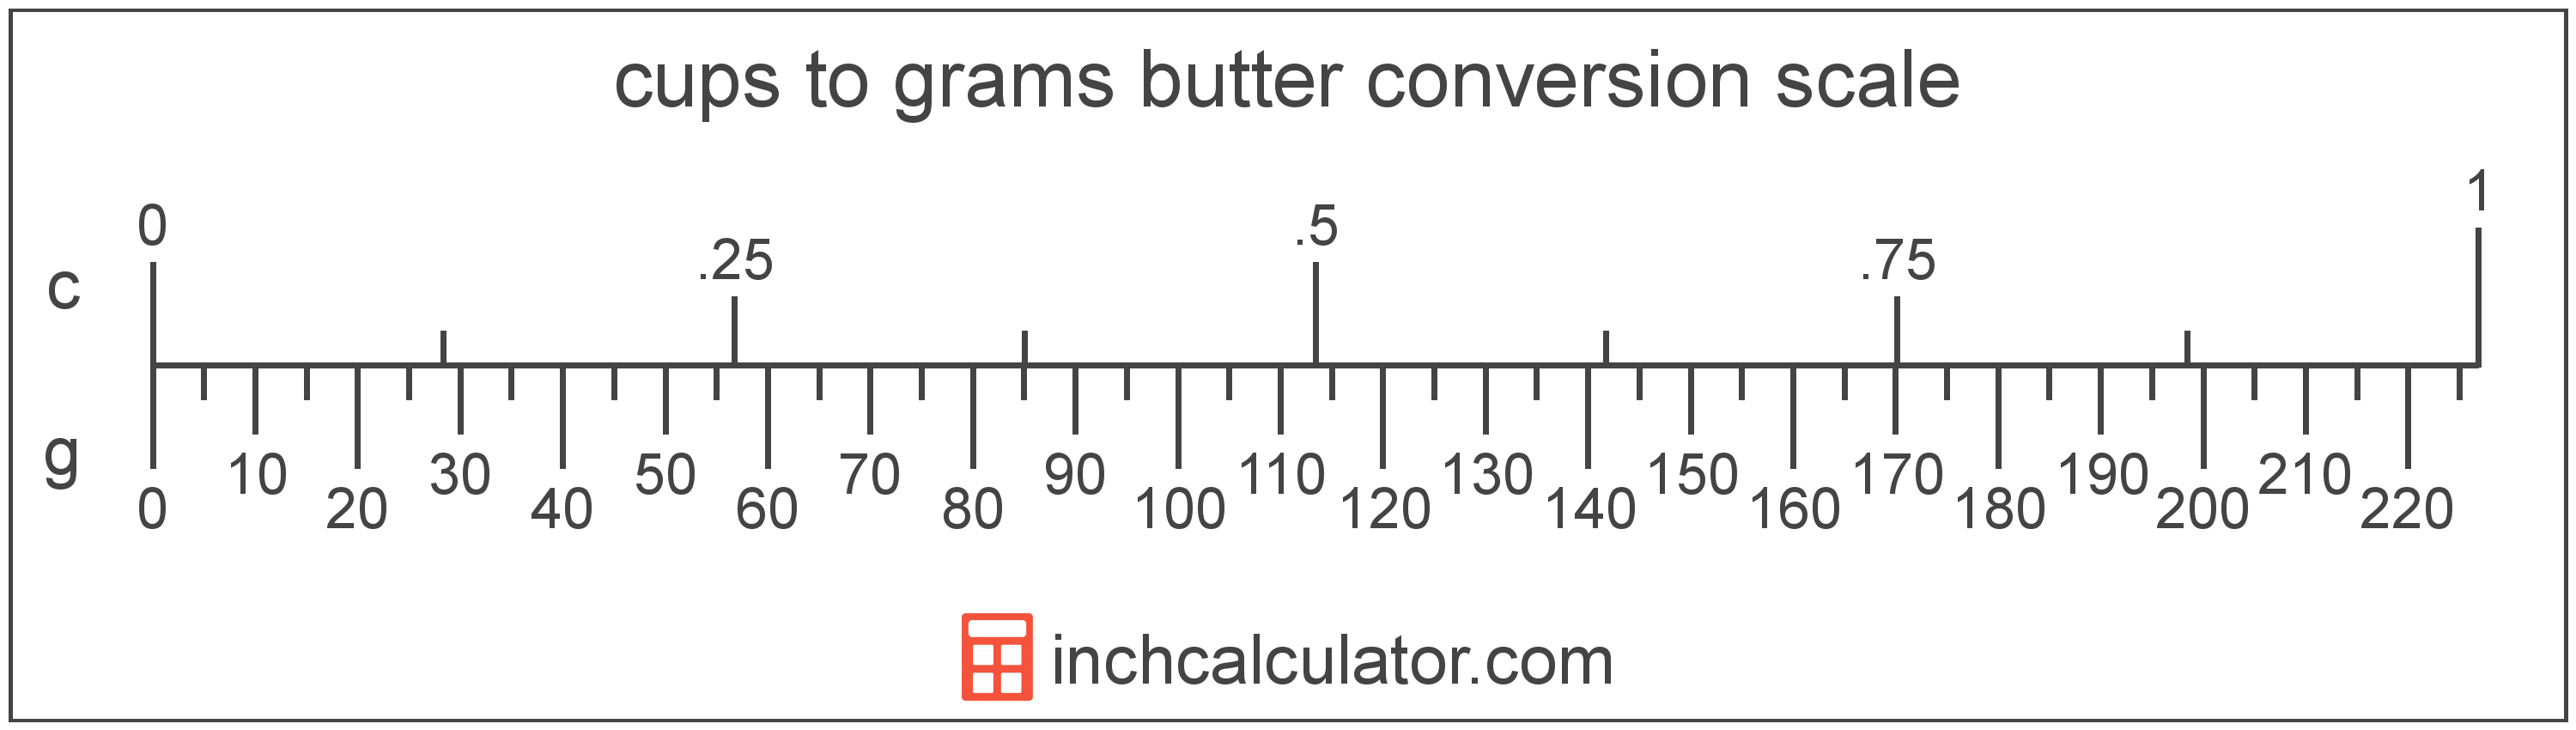 conversion scale showing grams and equivalent cups butter values